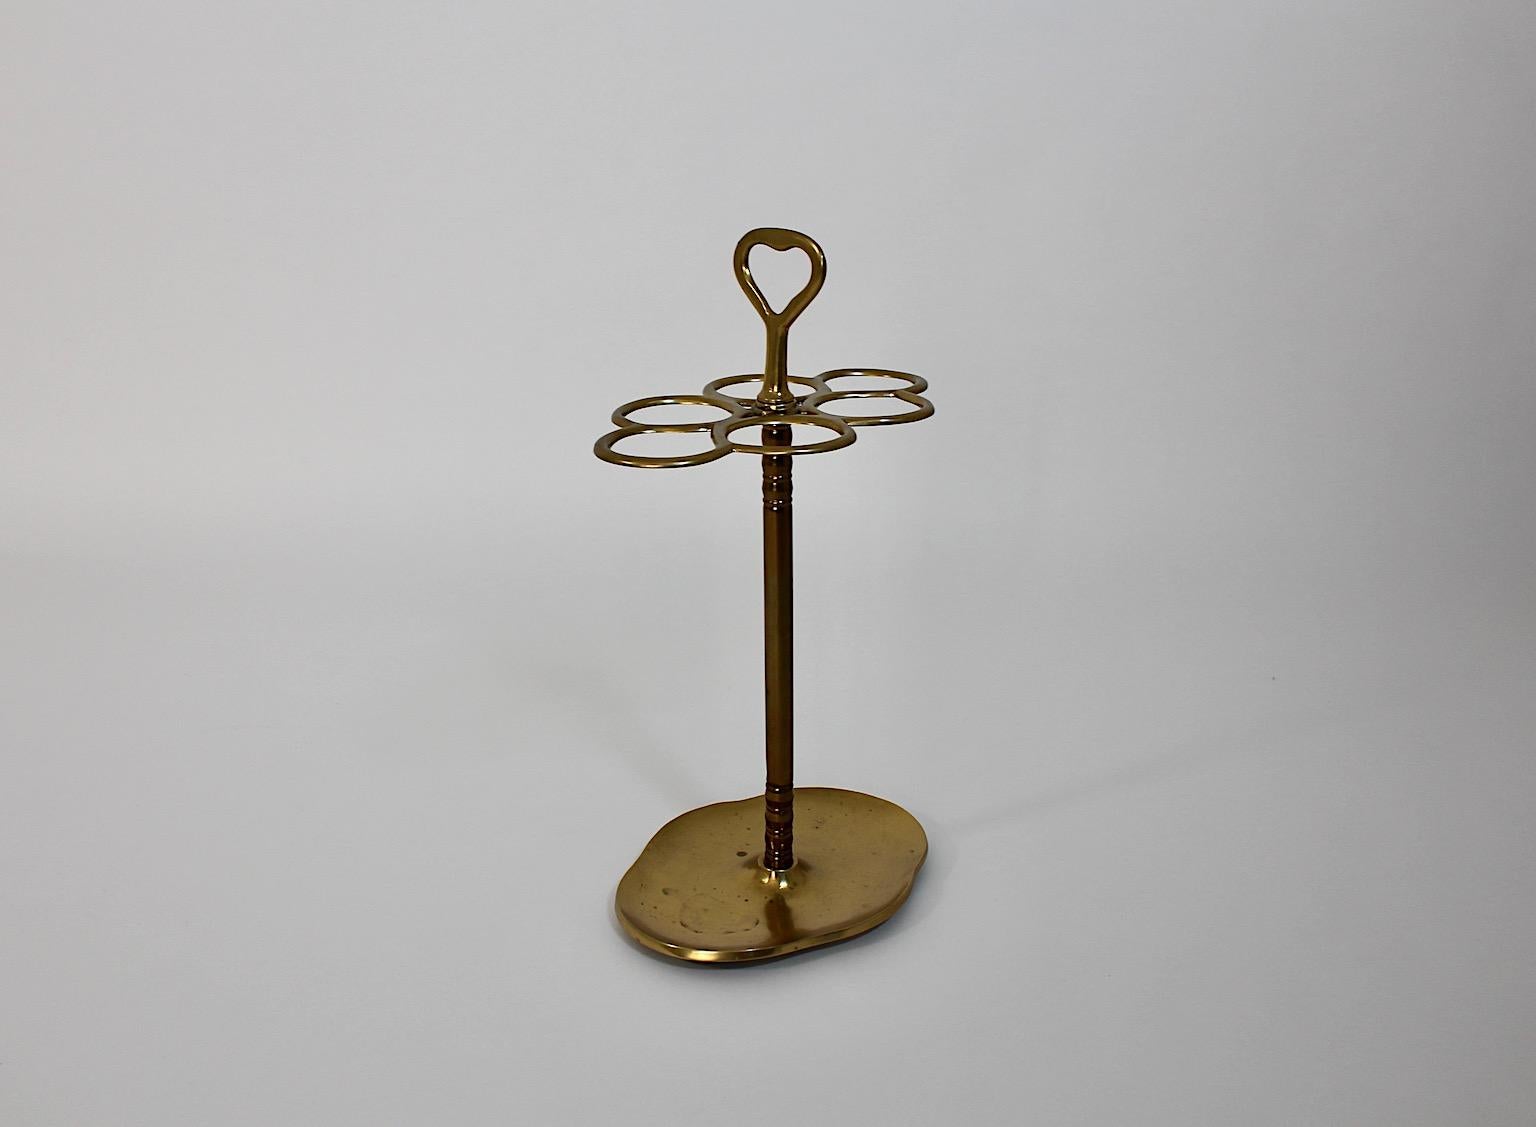 Hollywood Regency Style Vintage Brass Umbrella Stand Cane Holder 1970s Italy For Sale 2